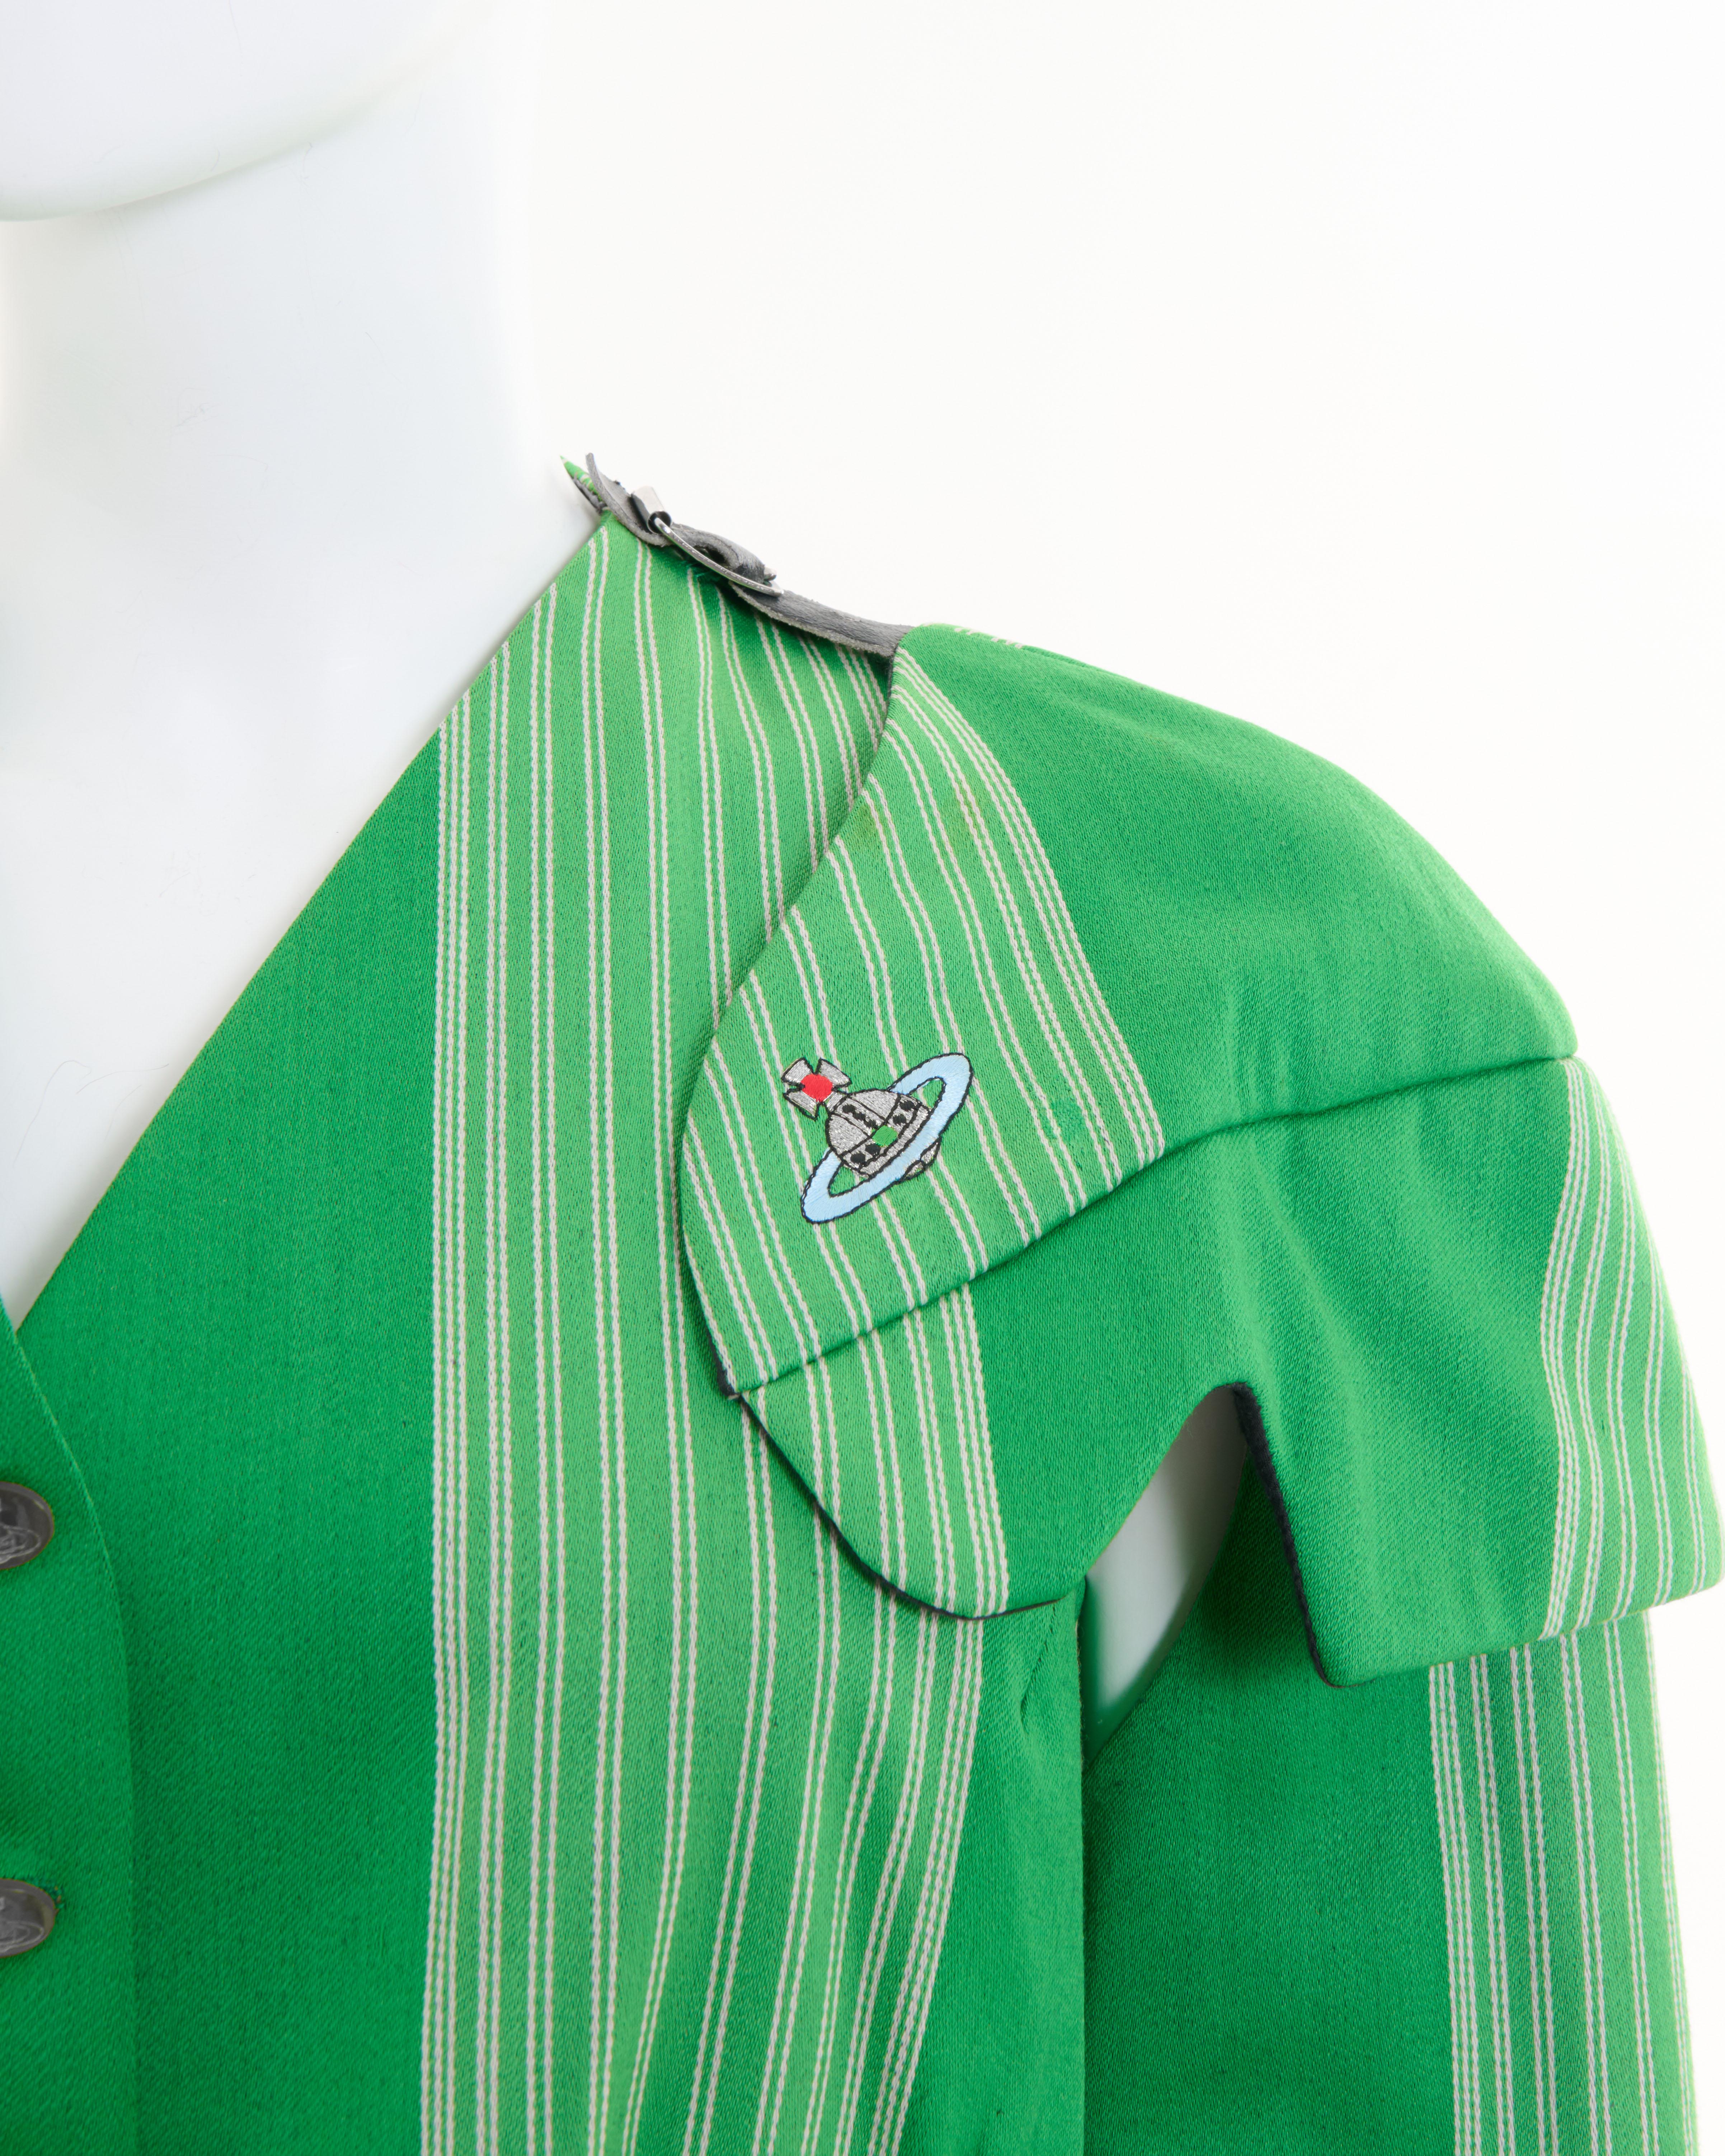 Vivienne Westwood  F/W 1988/89 ‘Time Machine’ Green striped Armour jacket For Sale 9